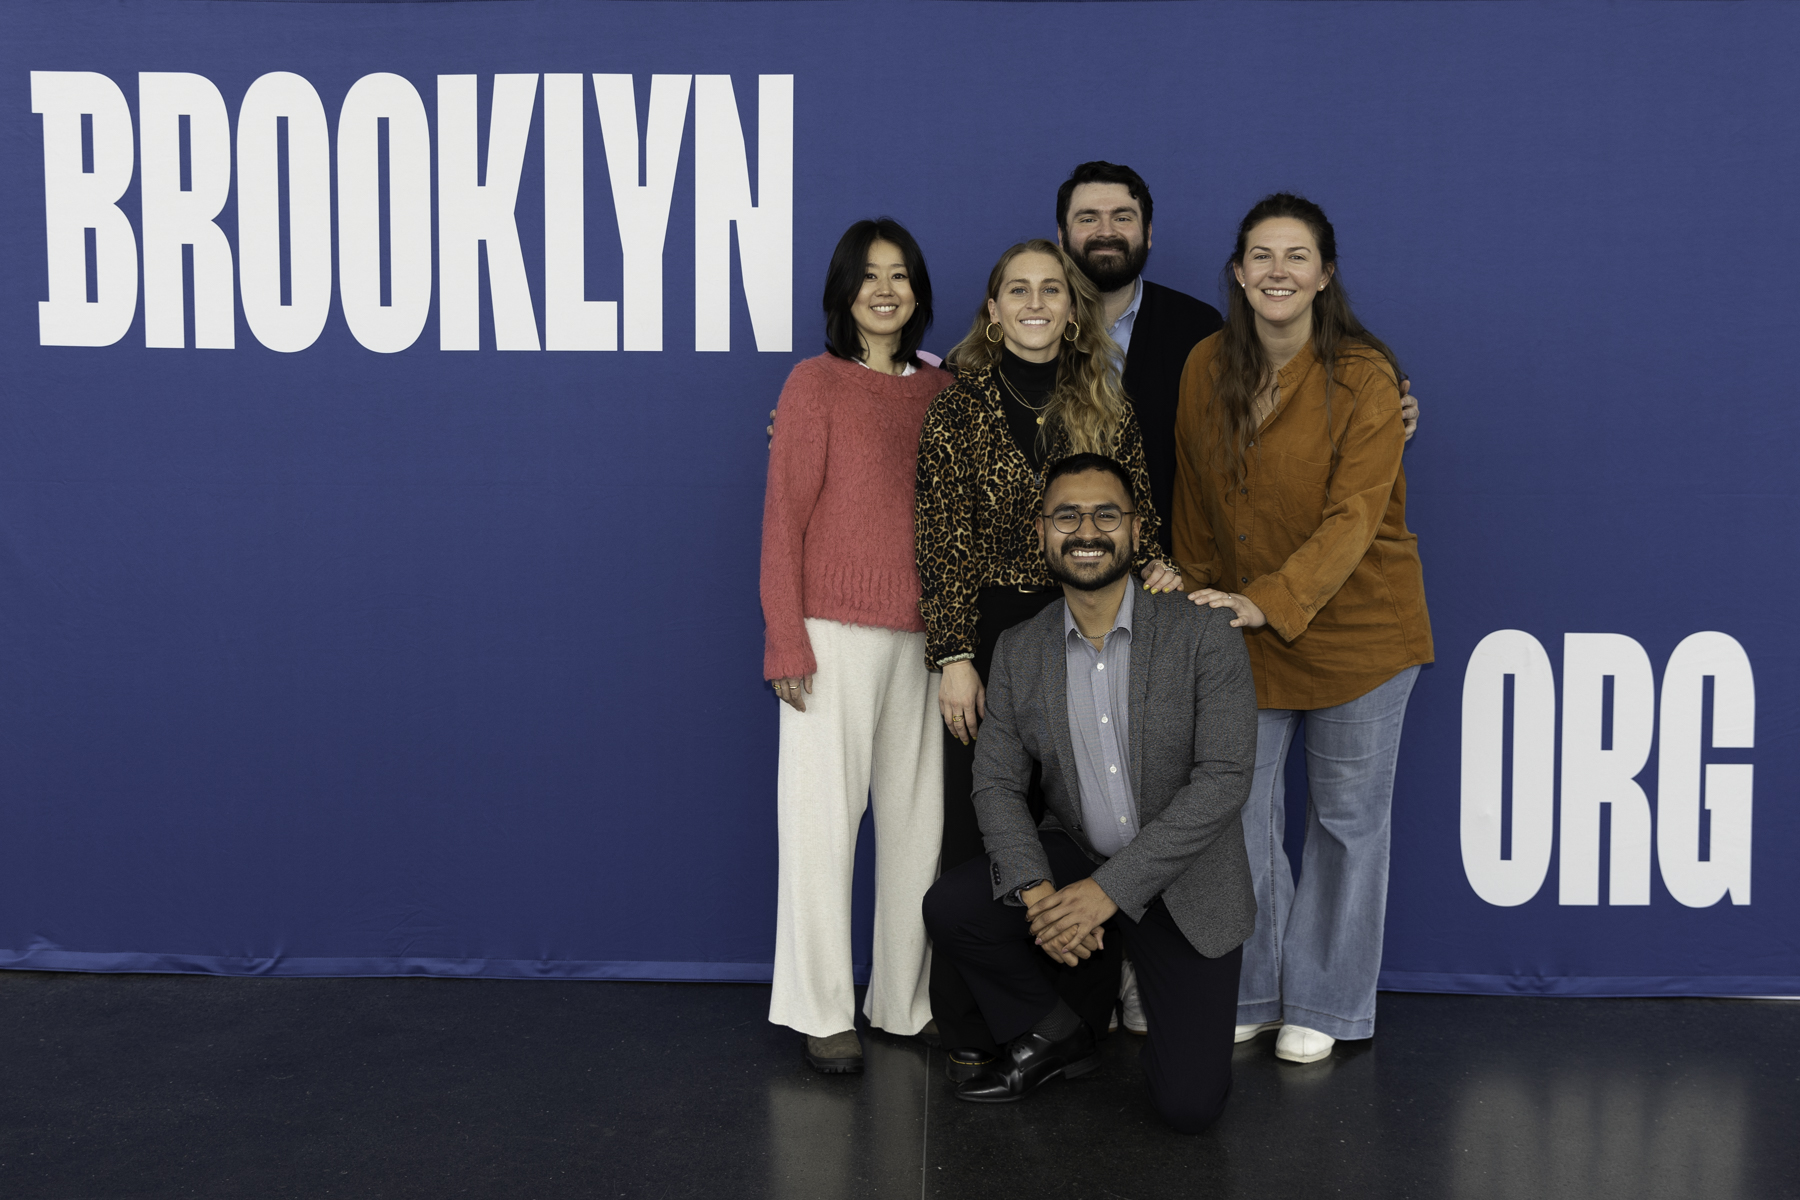 Five individuals posing for a group photo in front of a blue backdrop with the word "brooklyn" displayed prominently.